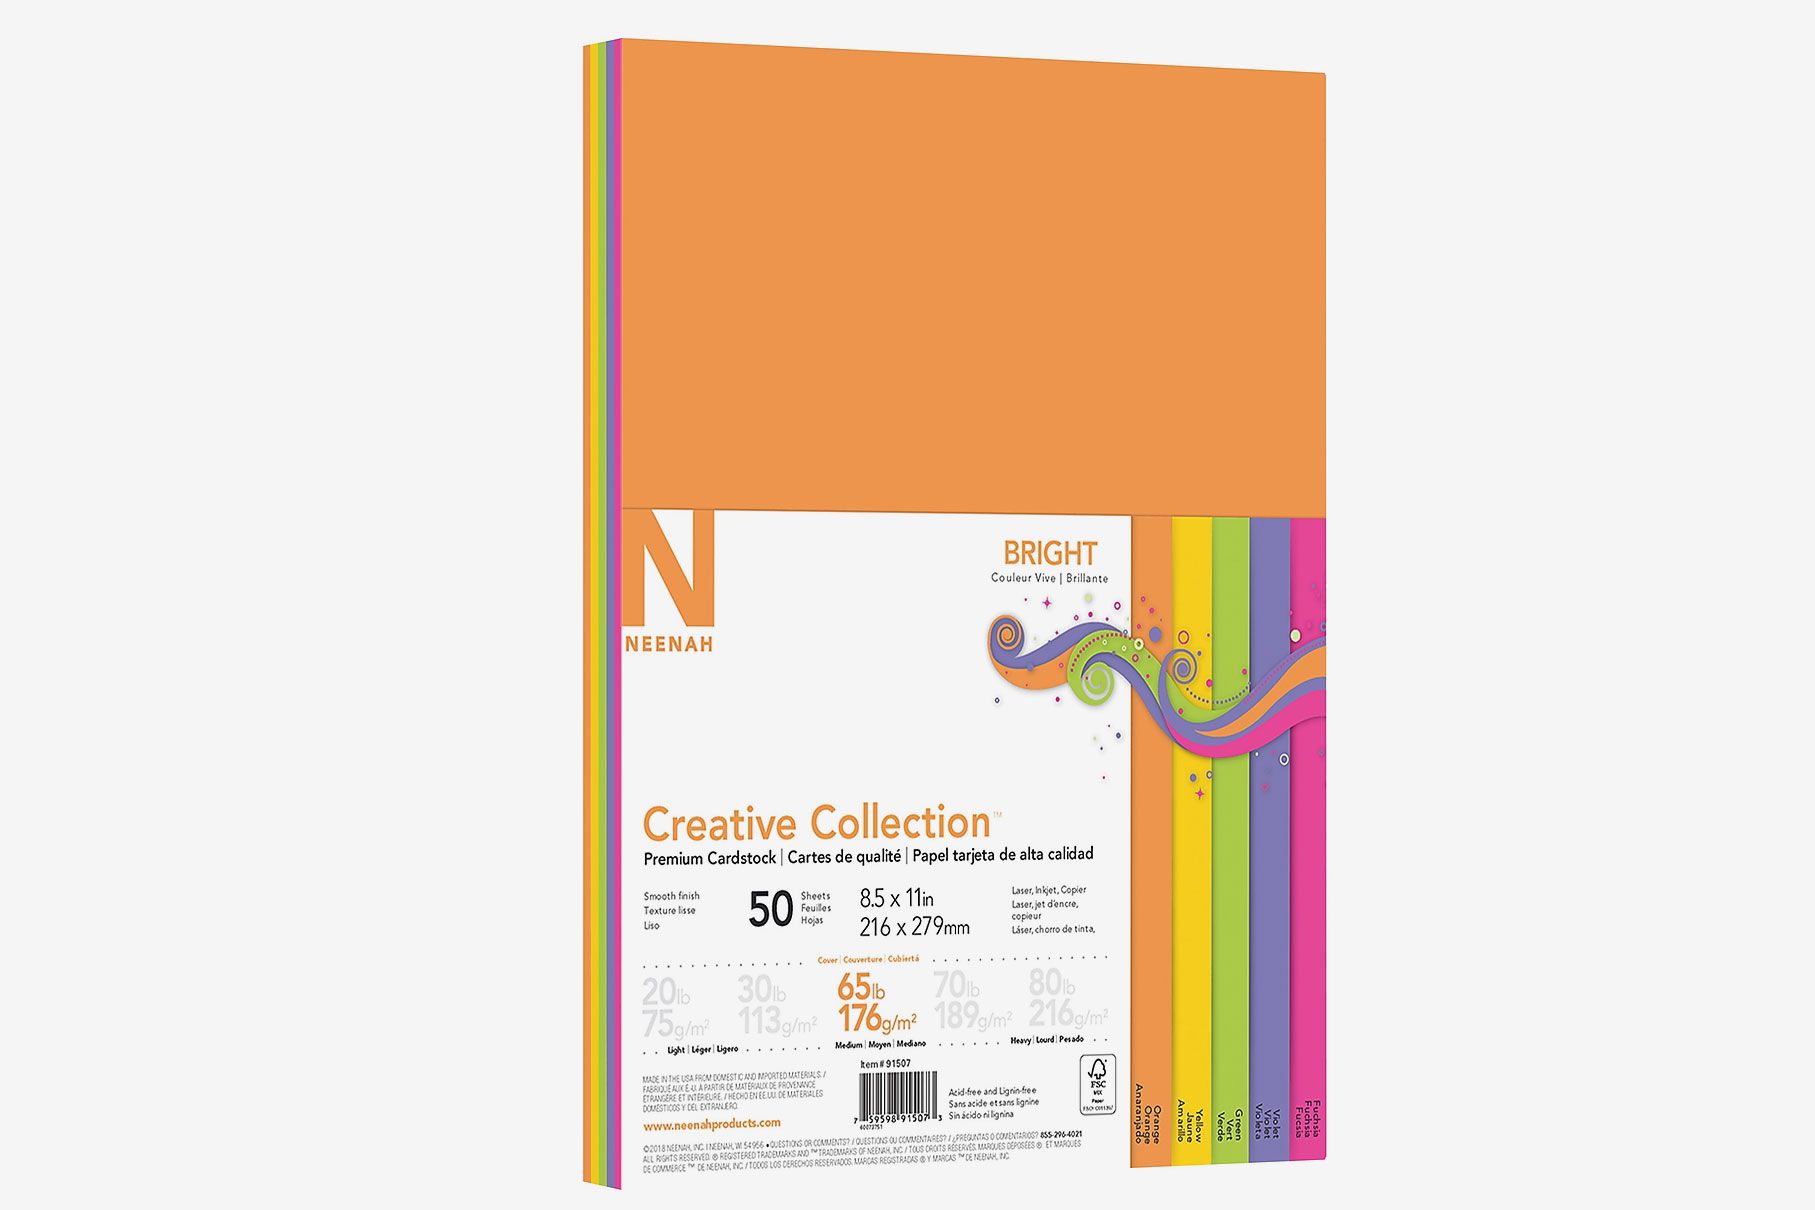 Neenah Creative Collection Double Color Textured Card Stock 8 12 x